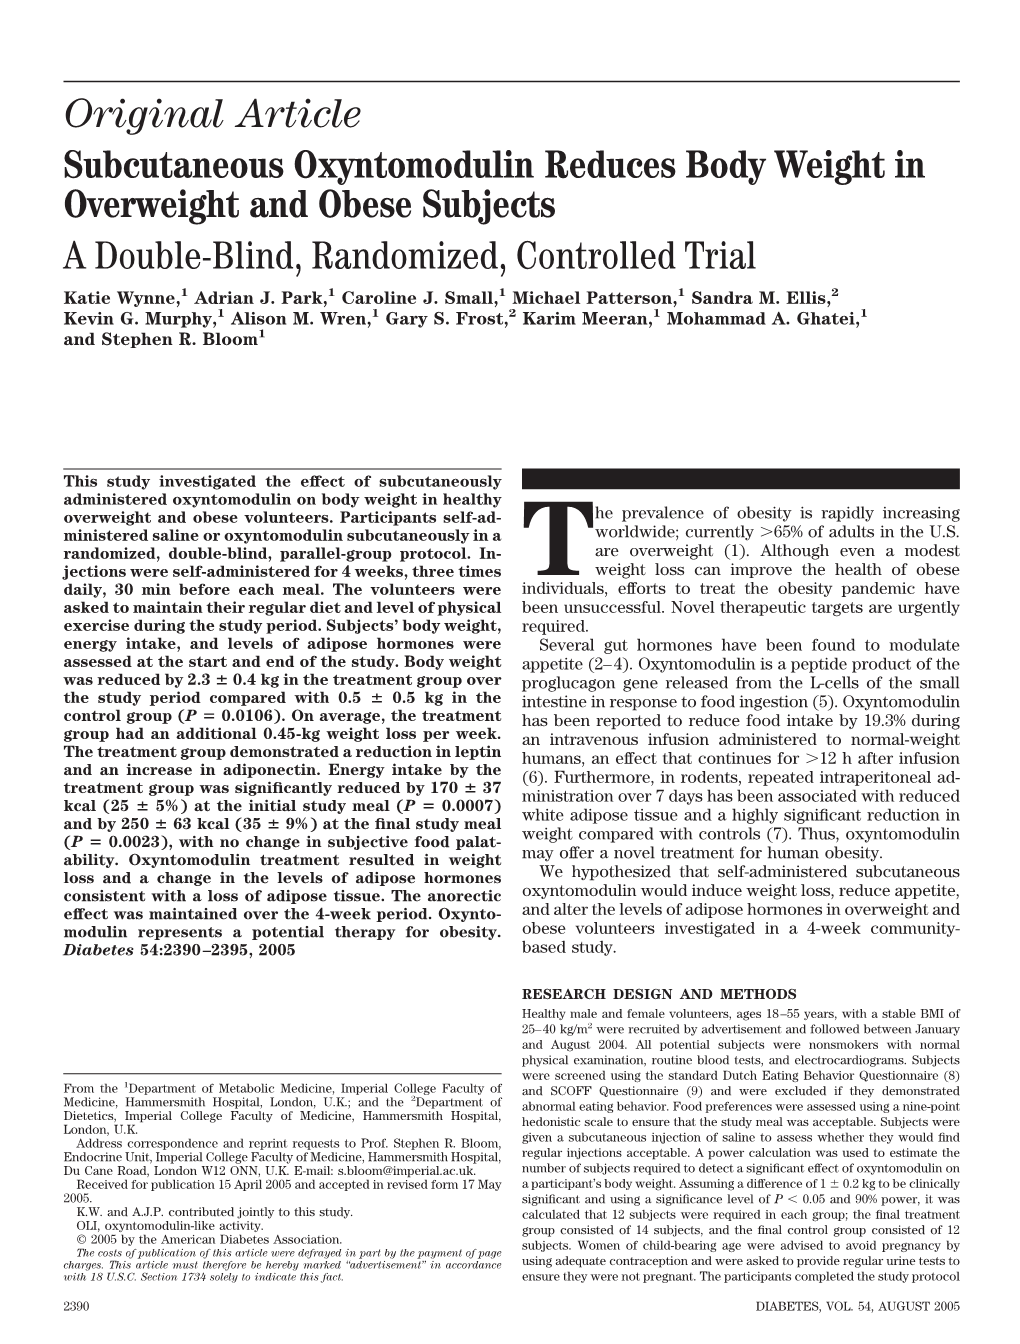 Original Article Subcutaneous Oxyntomodulin Reduces Body Weight in Overweight and Obese Subjects a Double-Blind, Randomized, Controlled Trial Katie Wynne,1 Adrian J